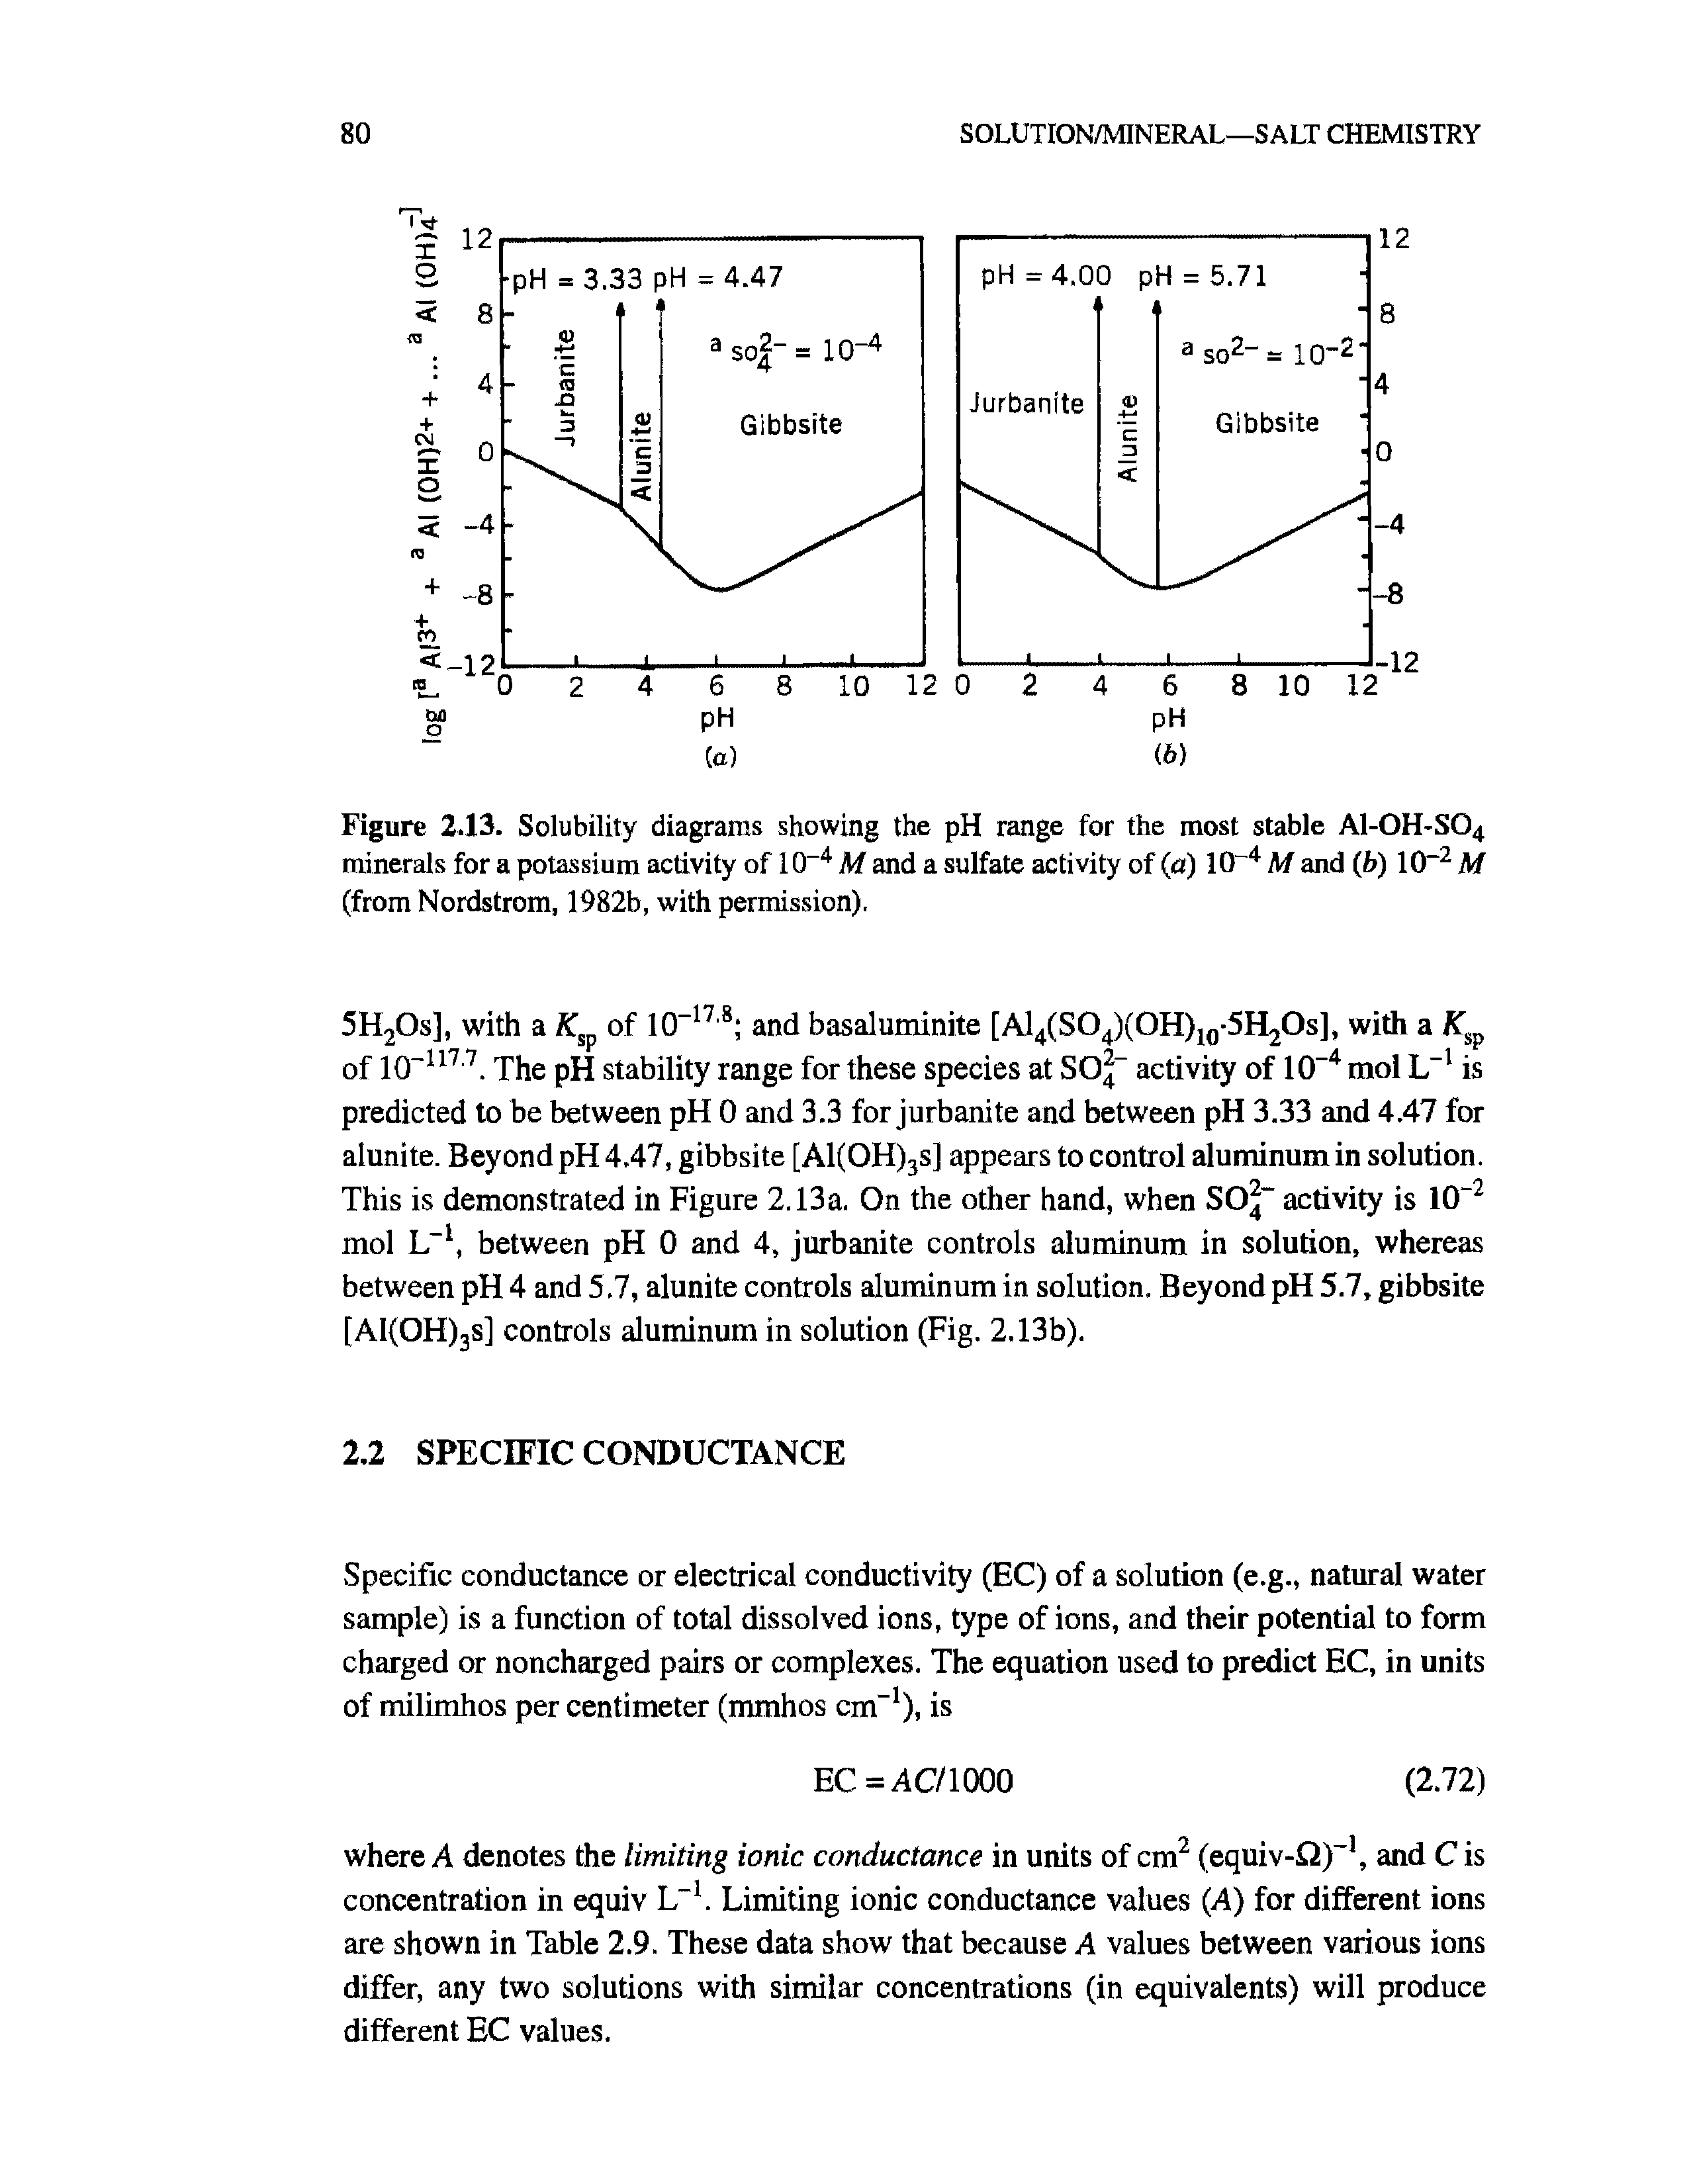 Figure 2.13. Solubility diagrams showing the pH range for the most stable A1-0H-S04 minerals for a potassium activity of 10-4 M and a sulfate activity of (a) 10 4 M and (b) 10-2 M (from Nordstrom, 1982b, with permission).